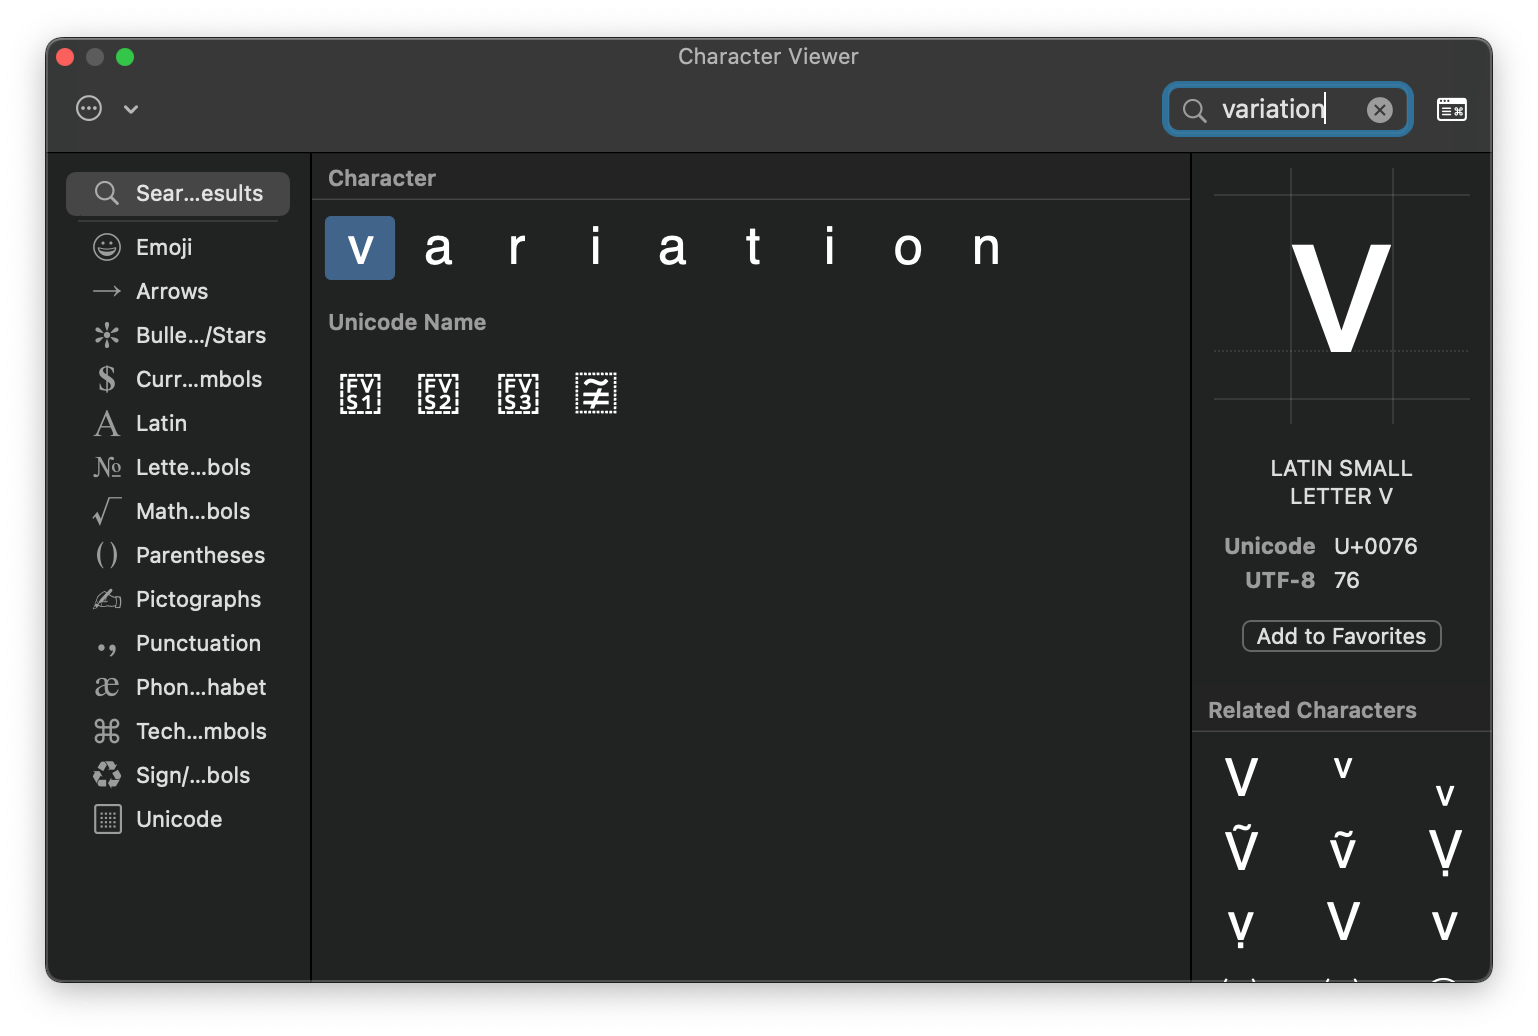 What you see when you type “variation” in the character-picker search box